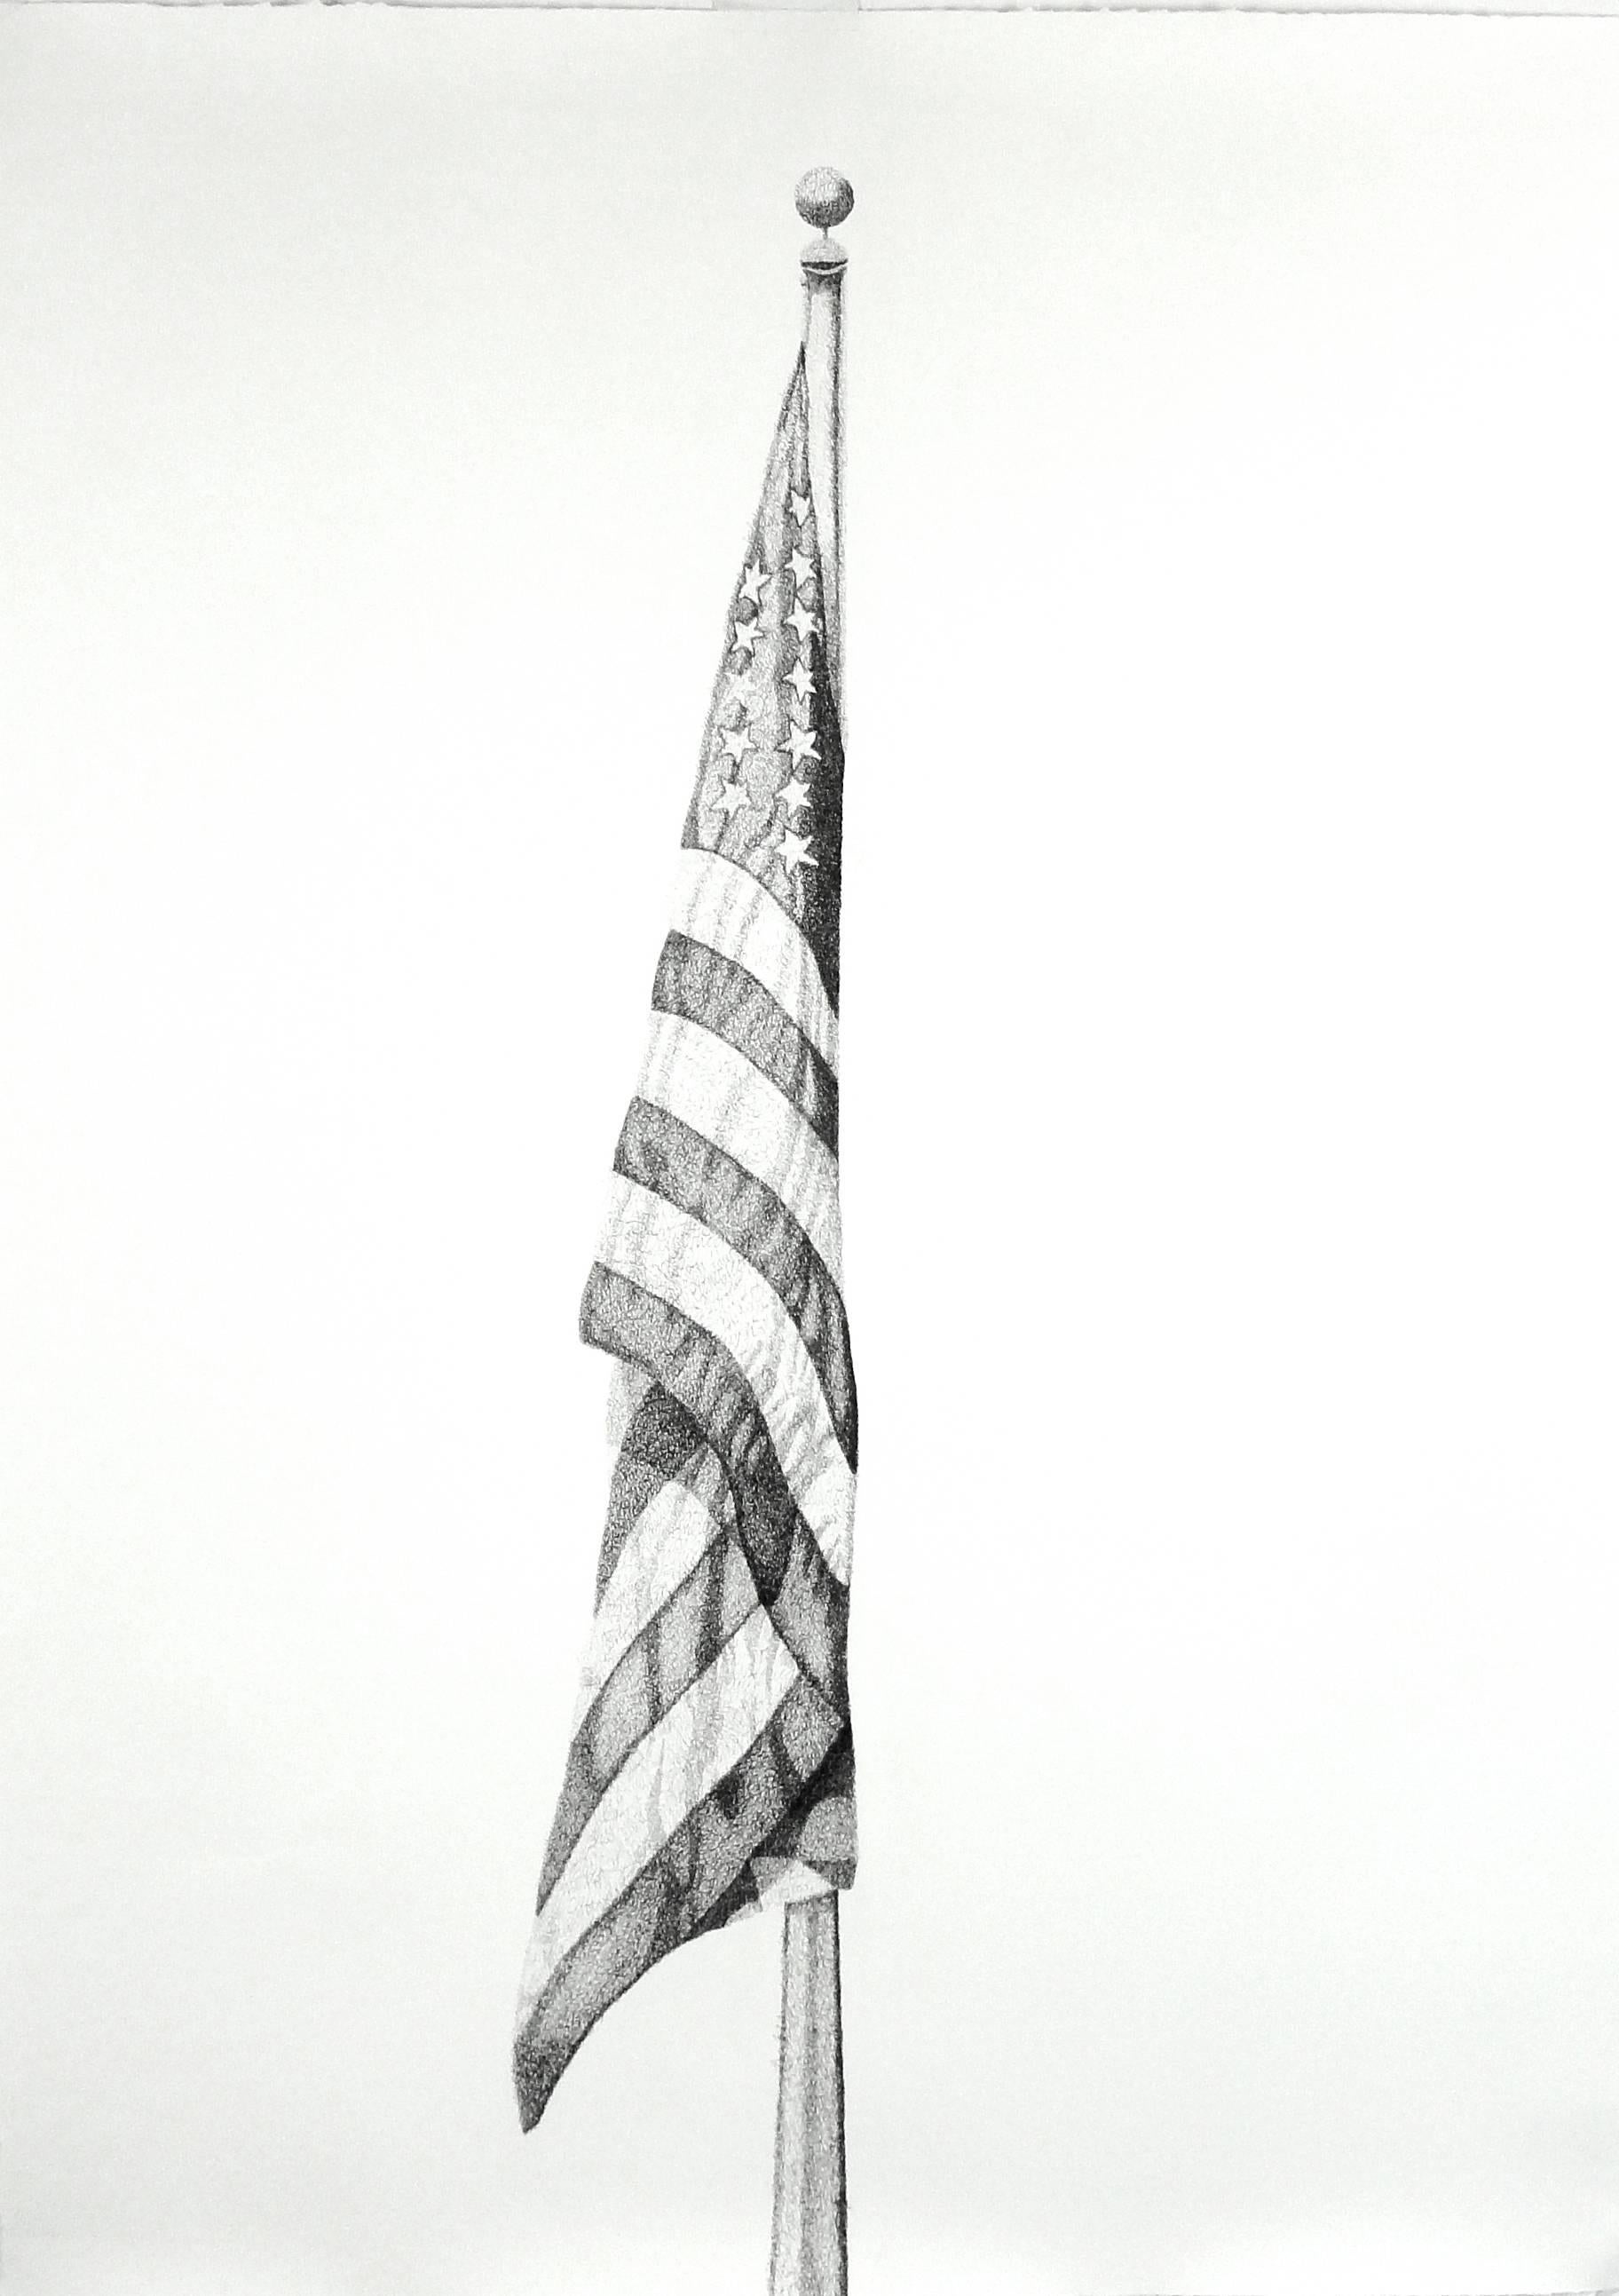 Oversized fine art print depicting the American flag by American artist Nimai Kesten.

"God Bless America," 2016
Inkjet print on Entrada rag bright 290 fine art paper.
Edition of 25 + 1 original pen on paper AP. Signed, dated and edition at bottom